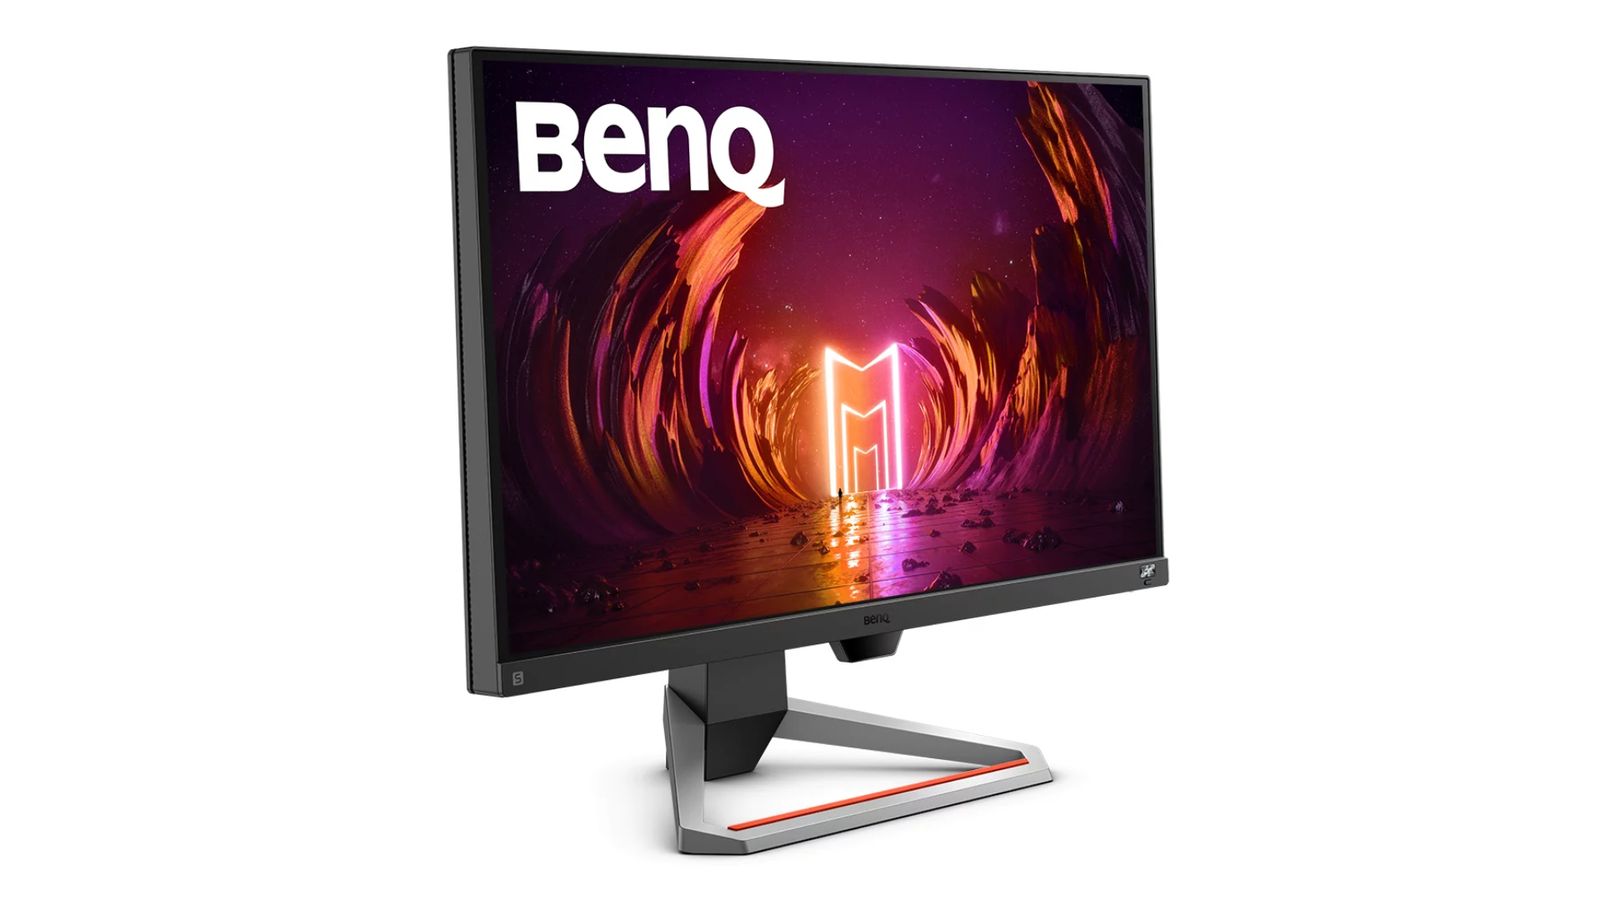 BenQ Mobiuz EX2710 product image of a grey monitor with an orange and pink lit up pathway on the display.